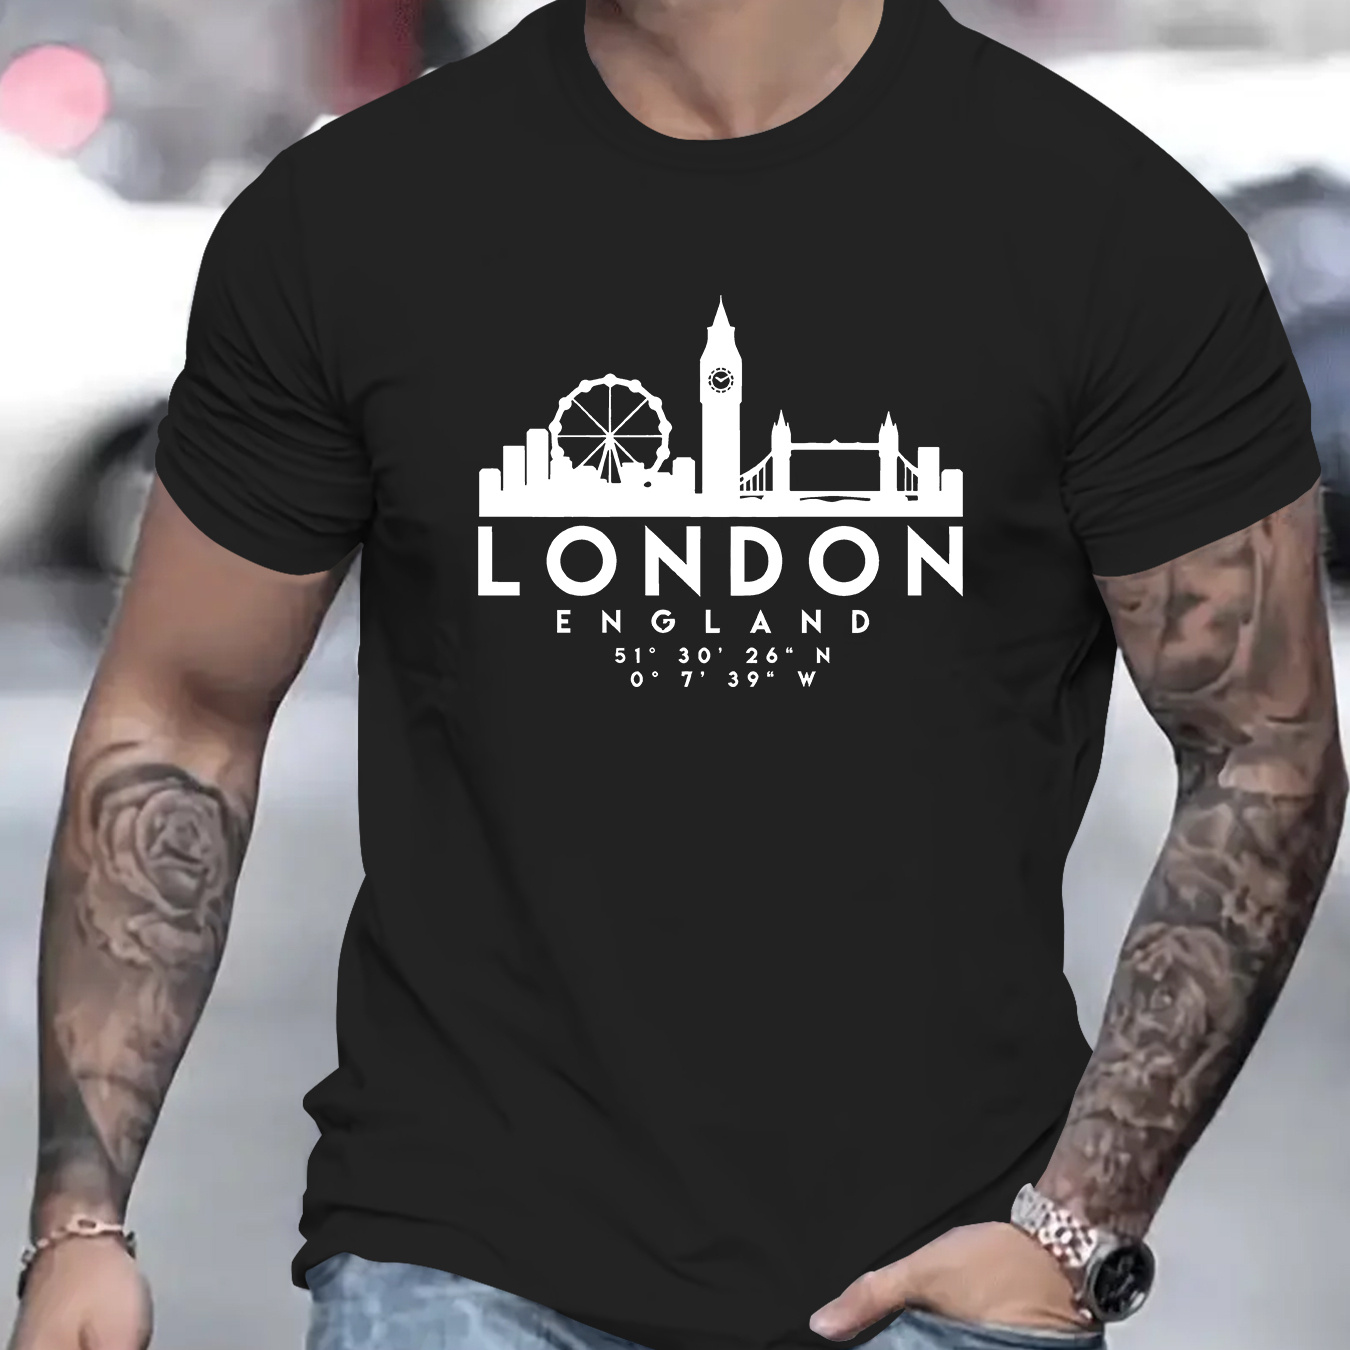 

Men's Casual Novelty T-shirt, " London " Creative Print Short Sleeve Summer Top, Comfort Fit, Stylish Crew Neck Tee For Daily Wear